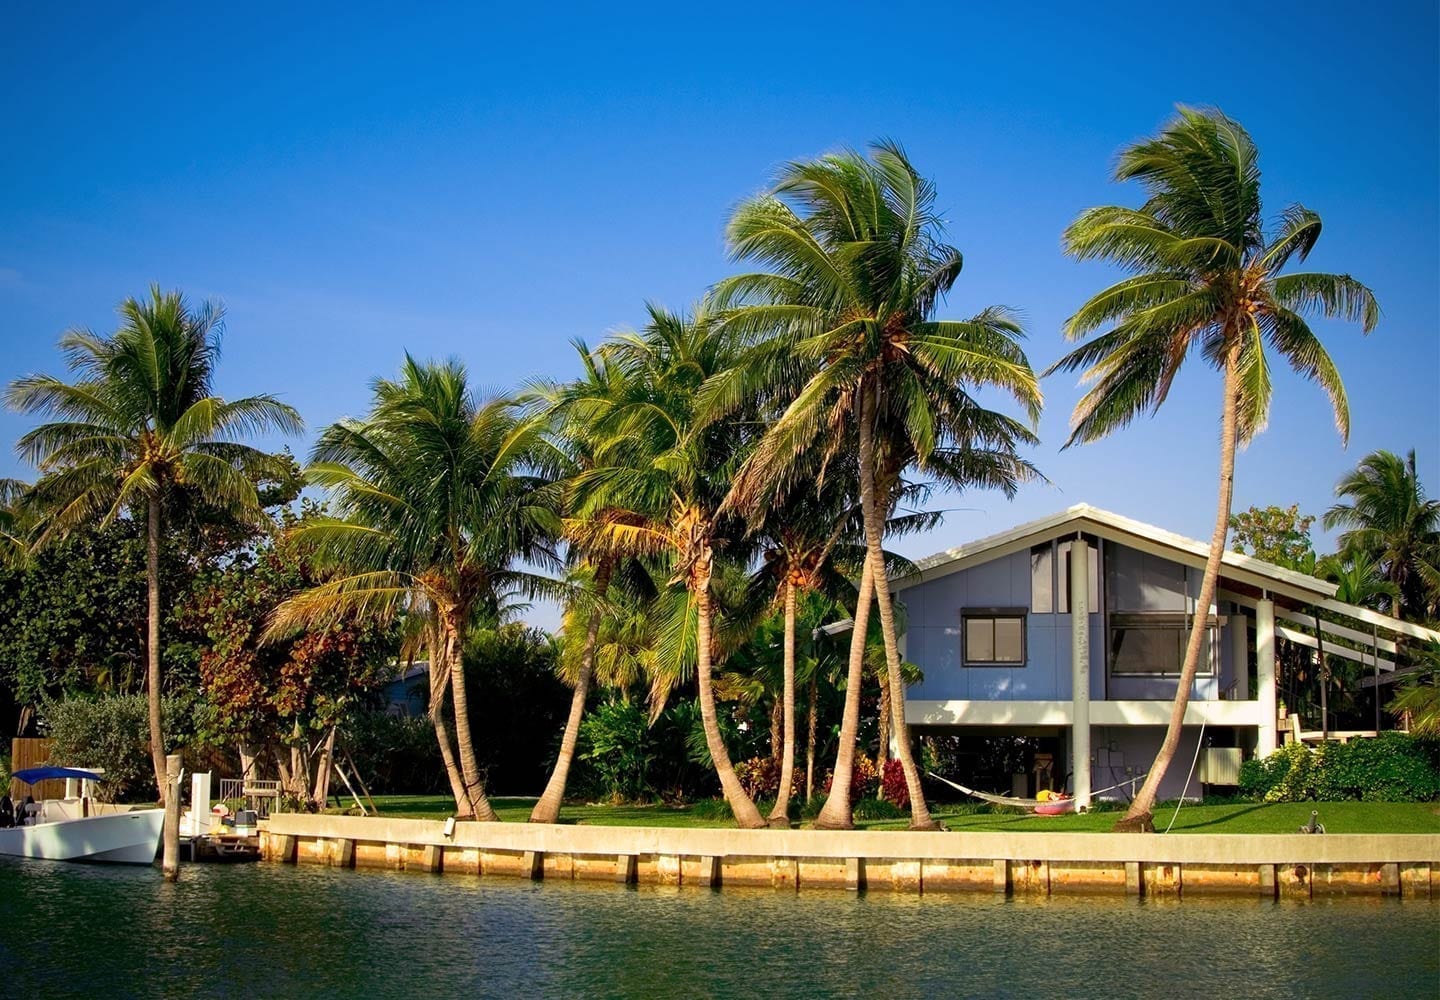 Buying property in Miami: what to look out for?